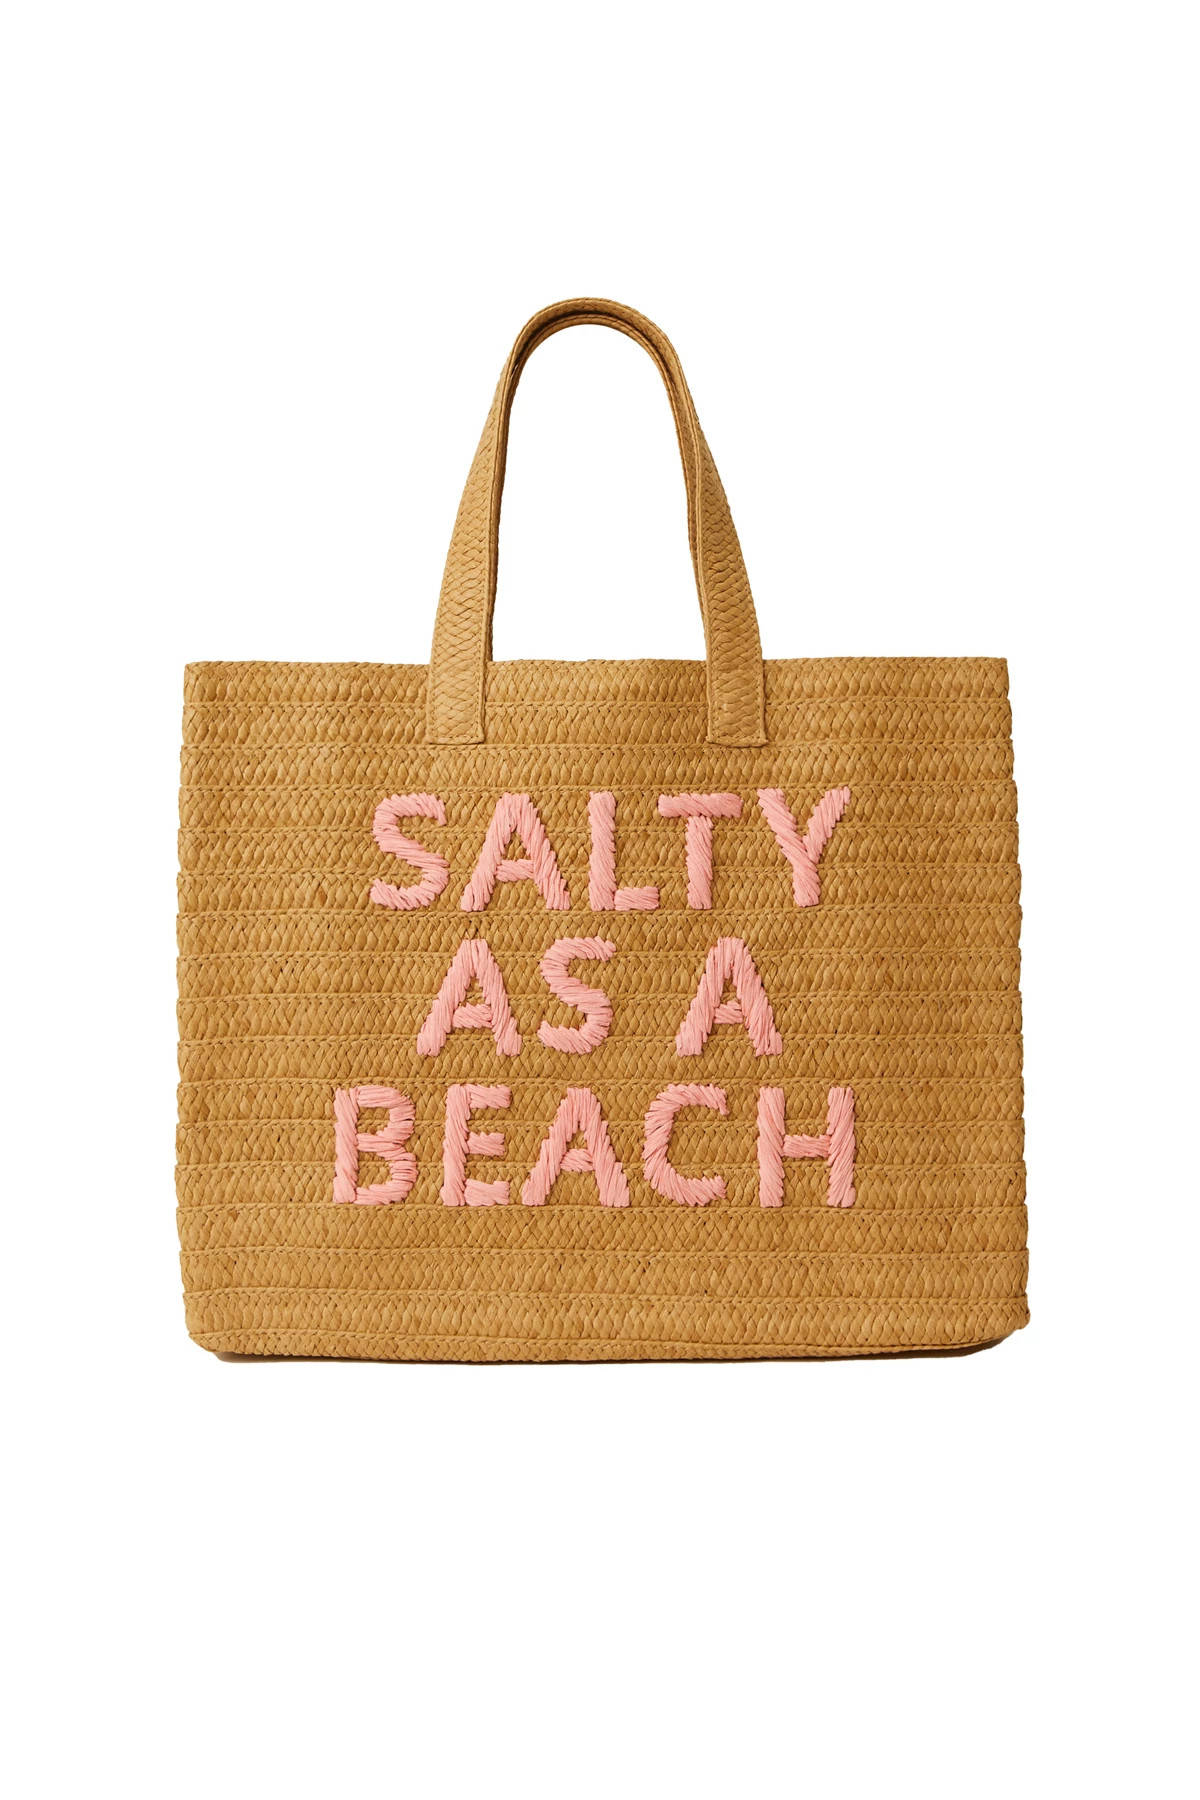 SAND CORAL Salty as a Beach Tote image number 1